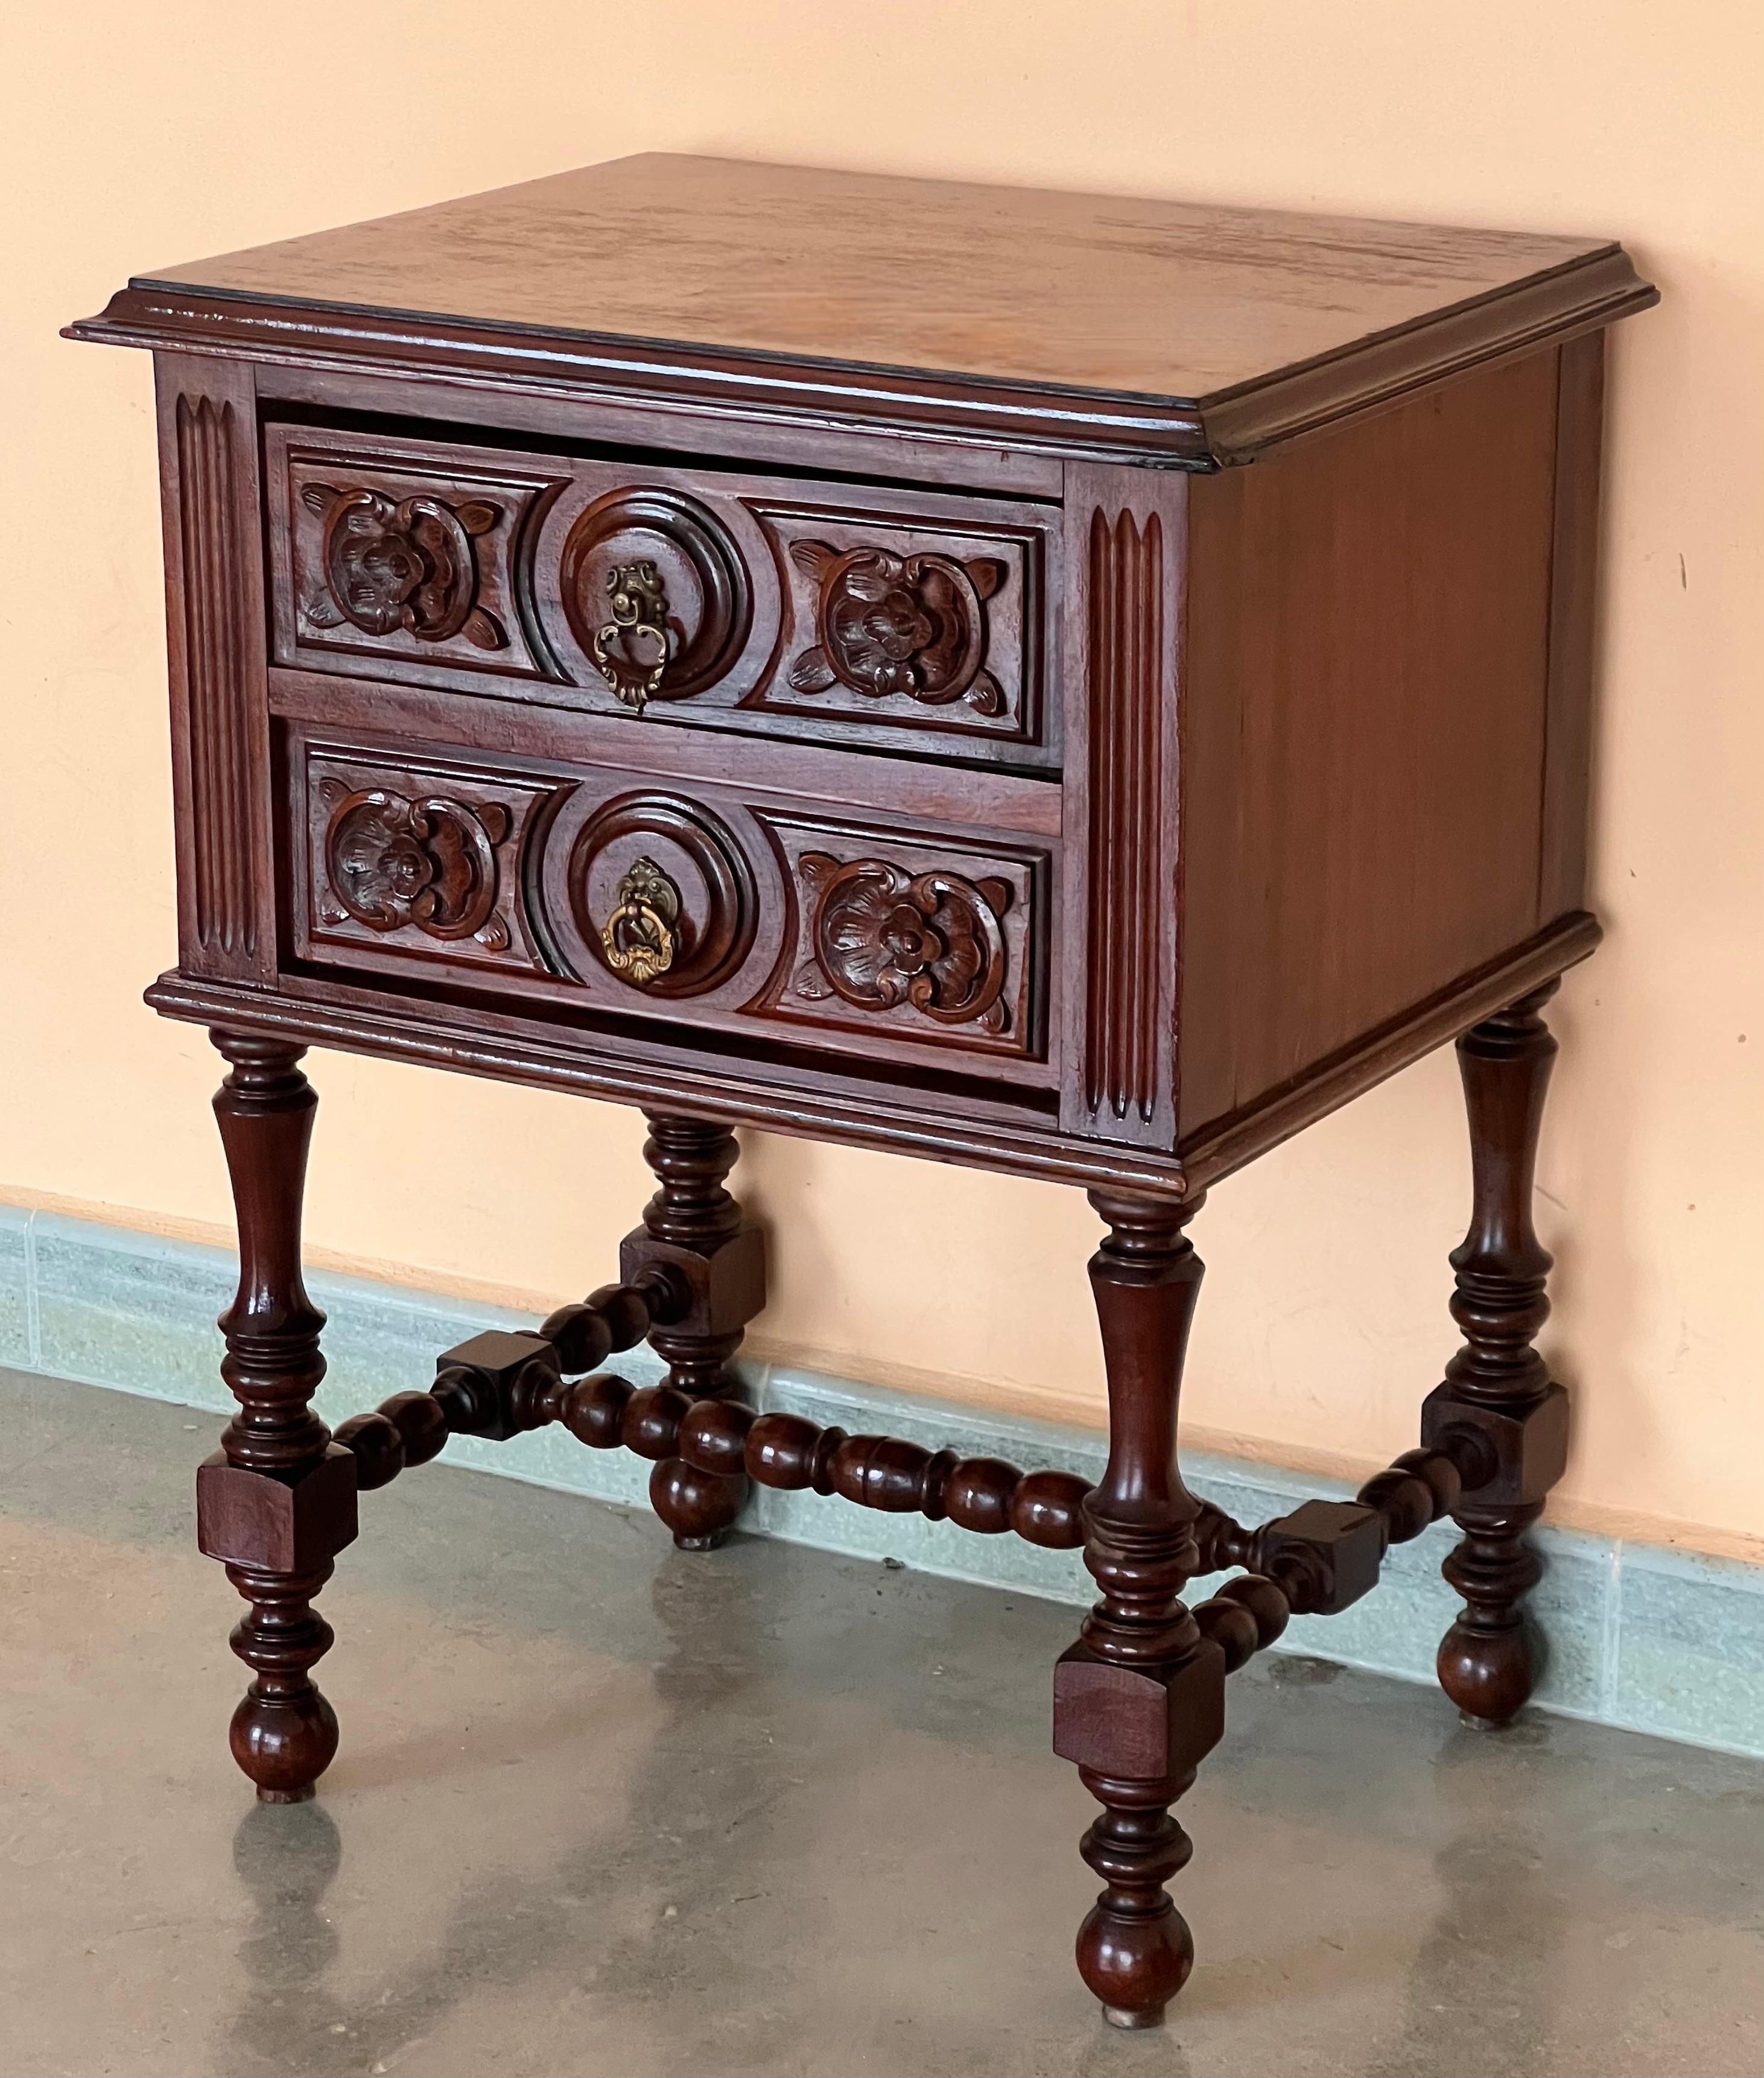 Pair of French Chestnut Bedside Nightstands with Two Drawers, Late 19th Century For Sale 1